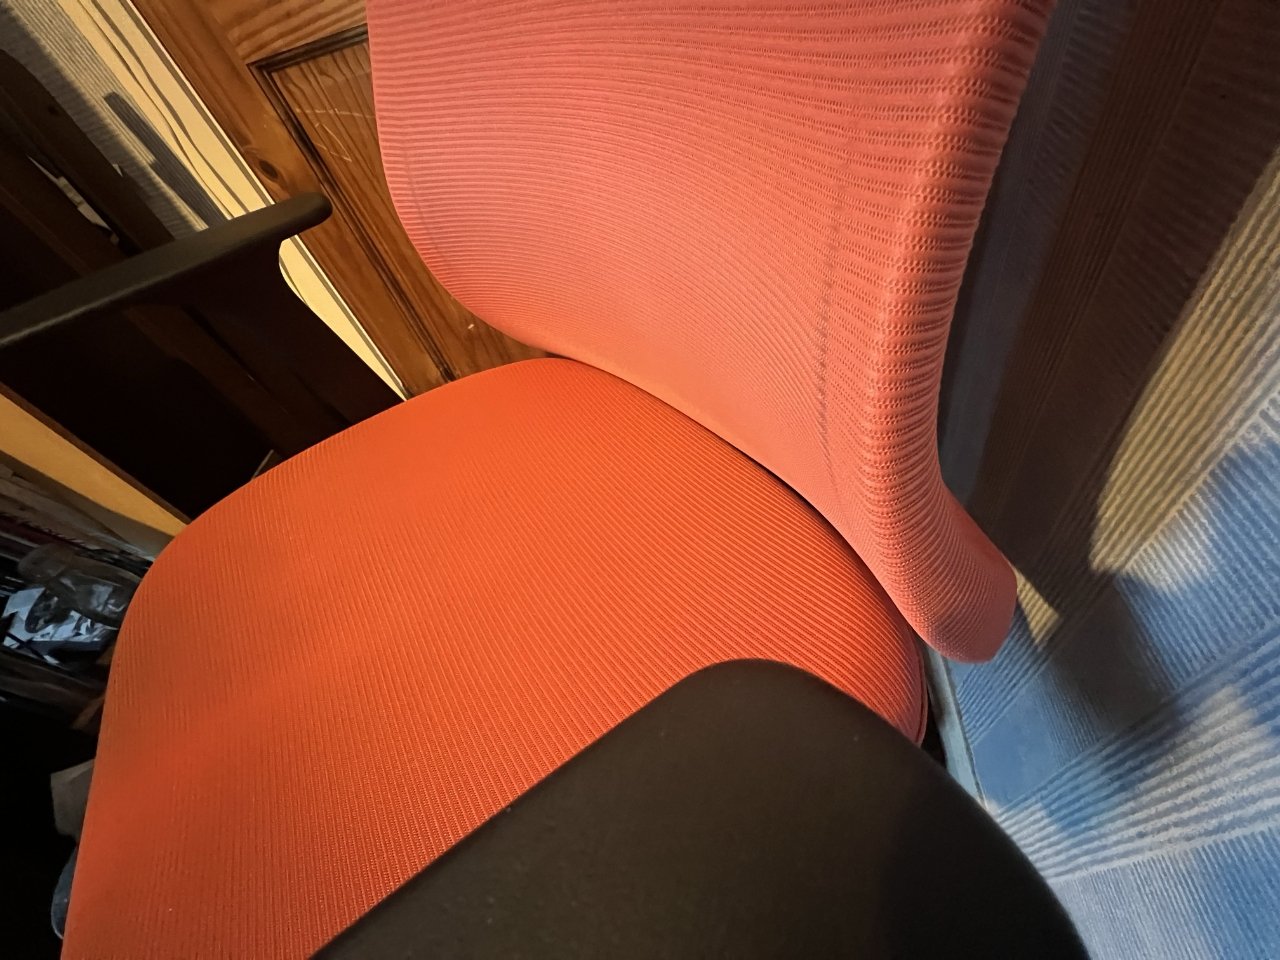 The rear of the chair is shaped to support your lower back